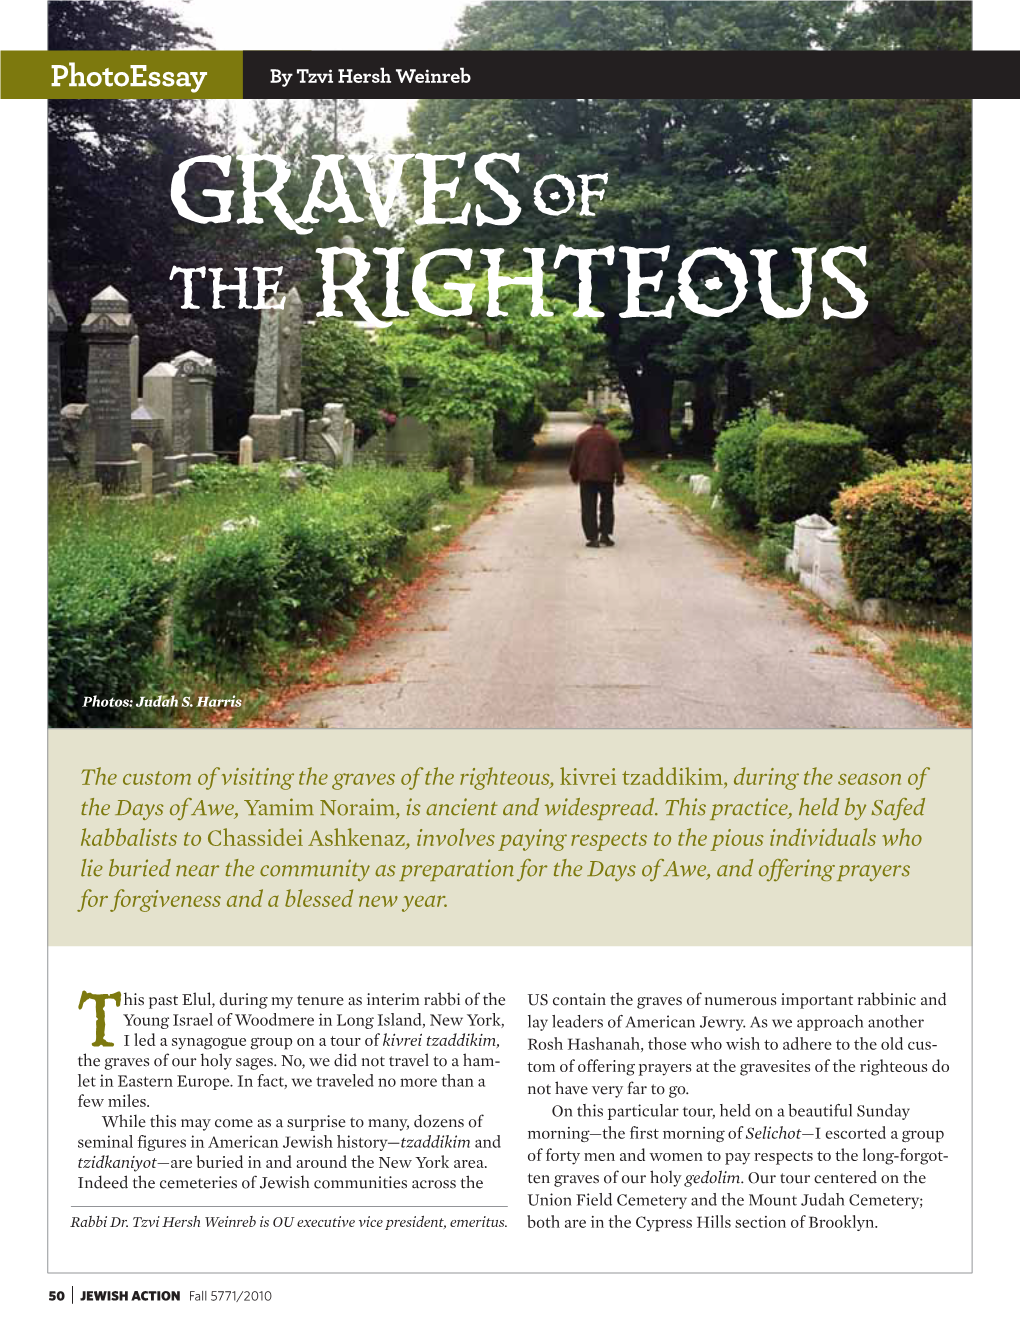 Gravesof the Righteous